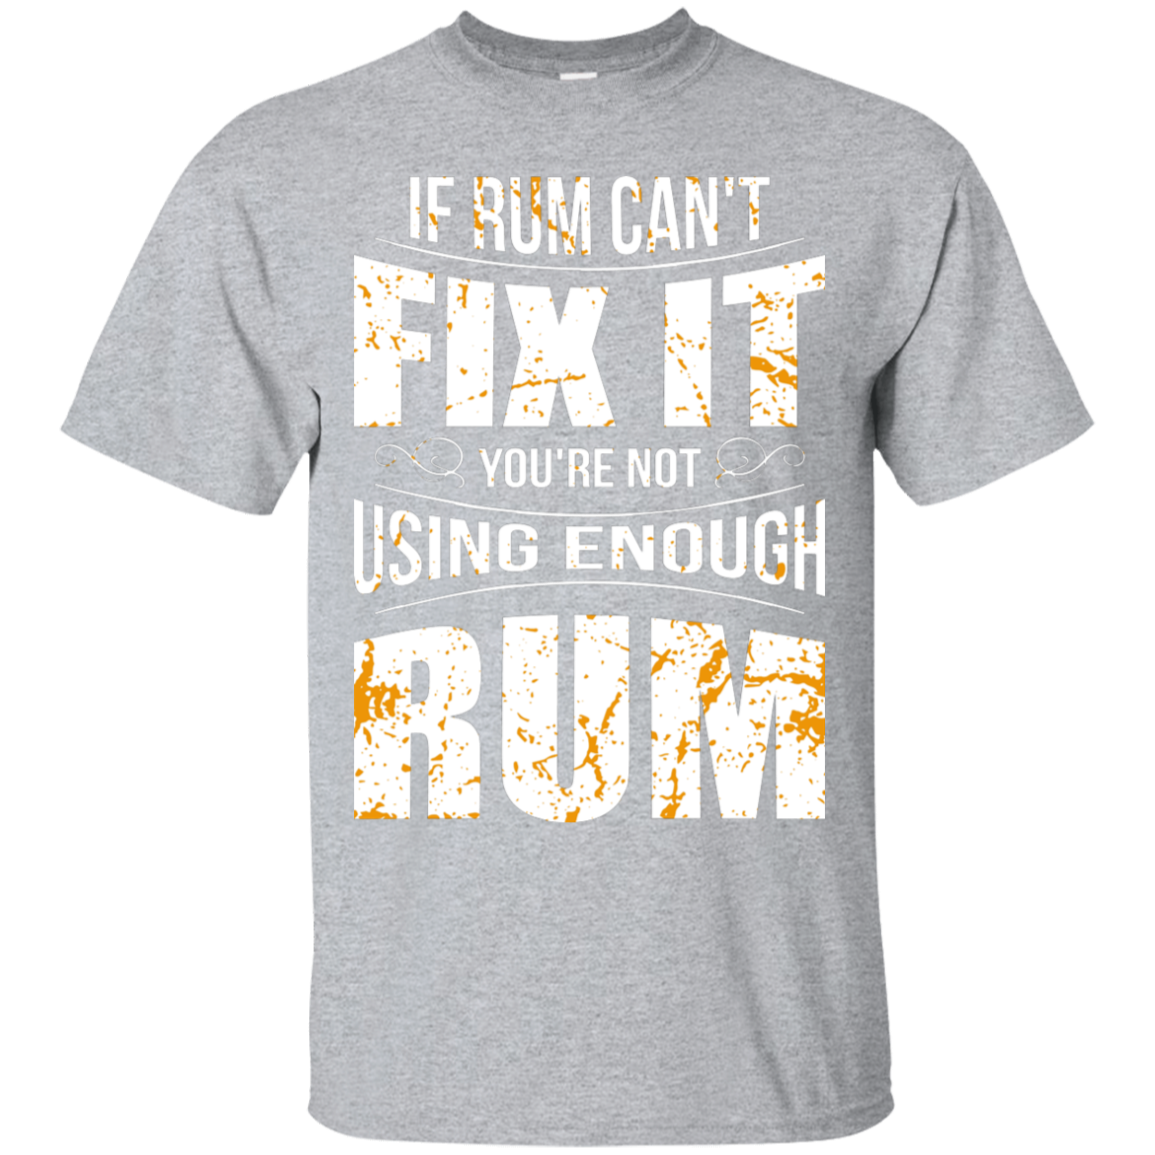 If Rum Can't Fix It You're Not Using Enough Rum T-Shirt Apparel - The Beer Lodge